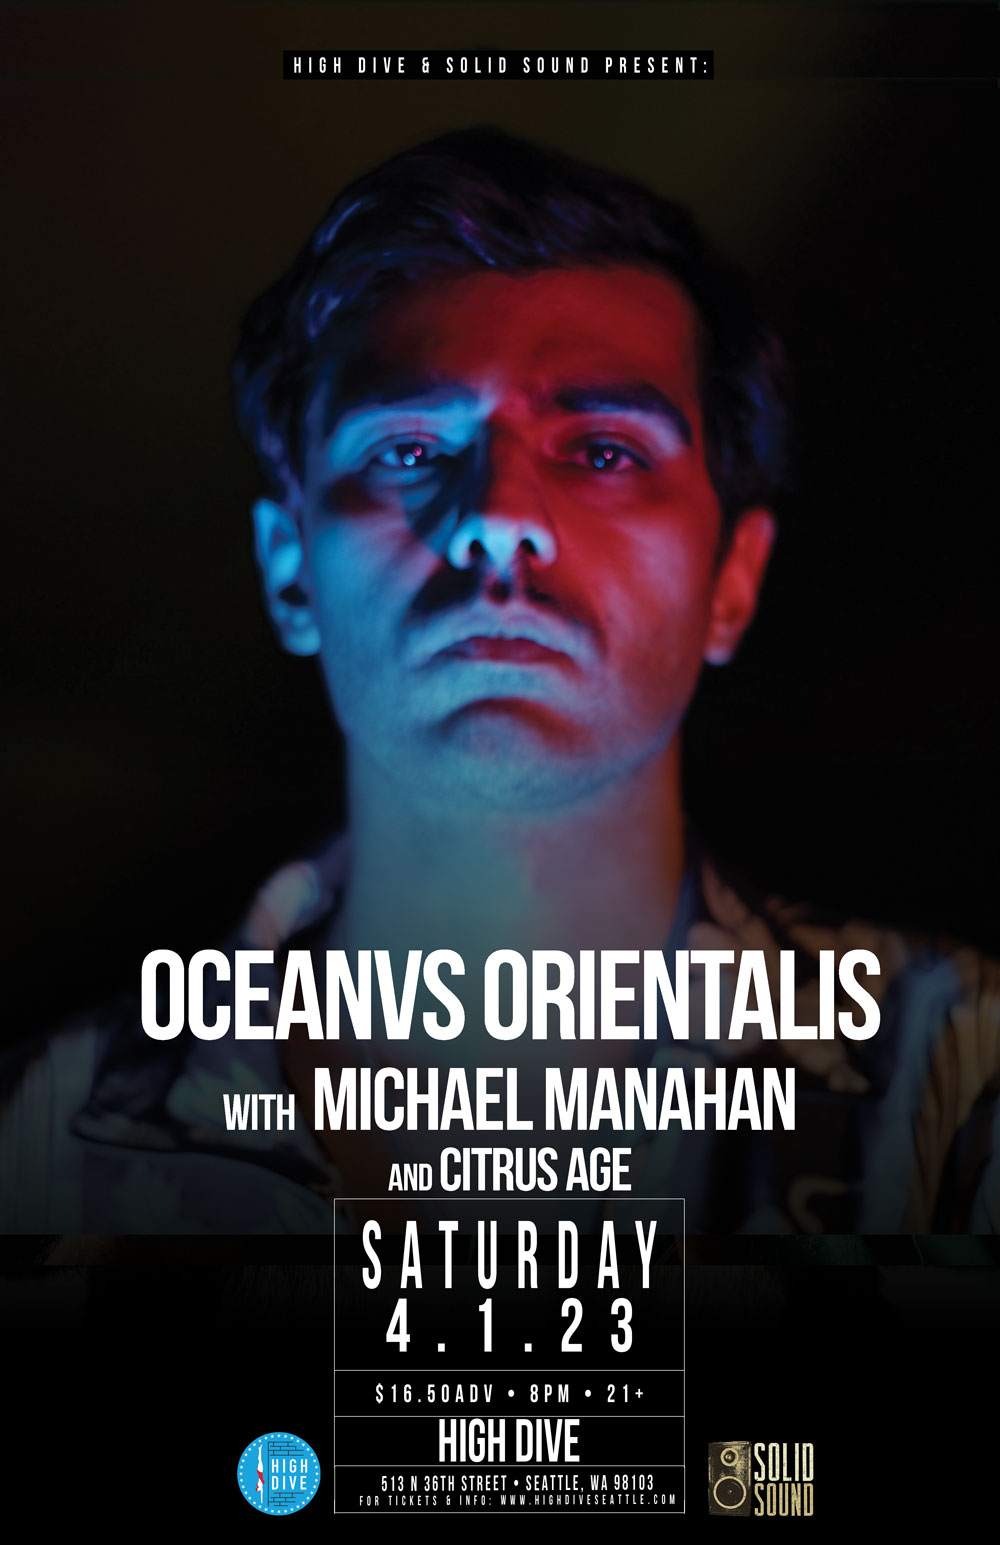 Oceanvs Orientalis with Michael Manahan and Citrus Age - Página frontal